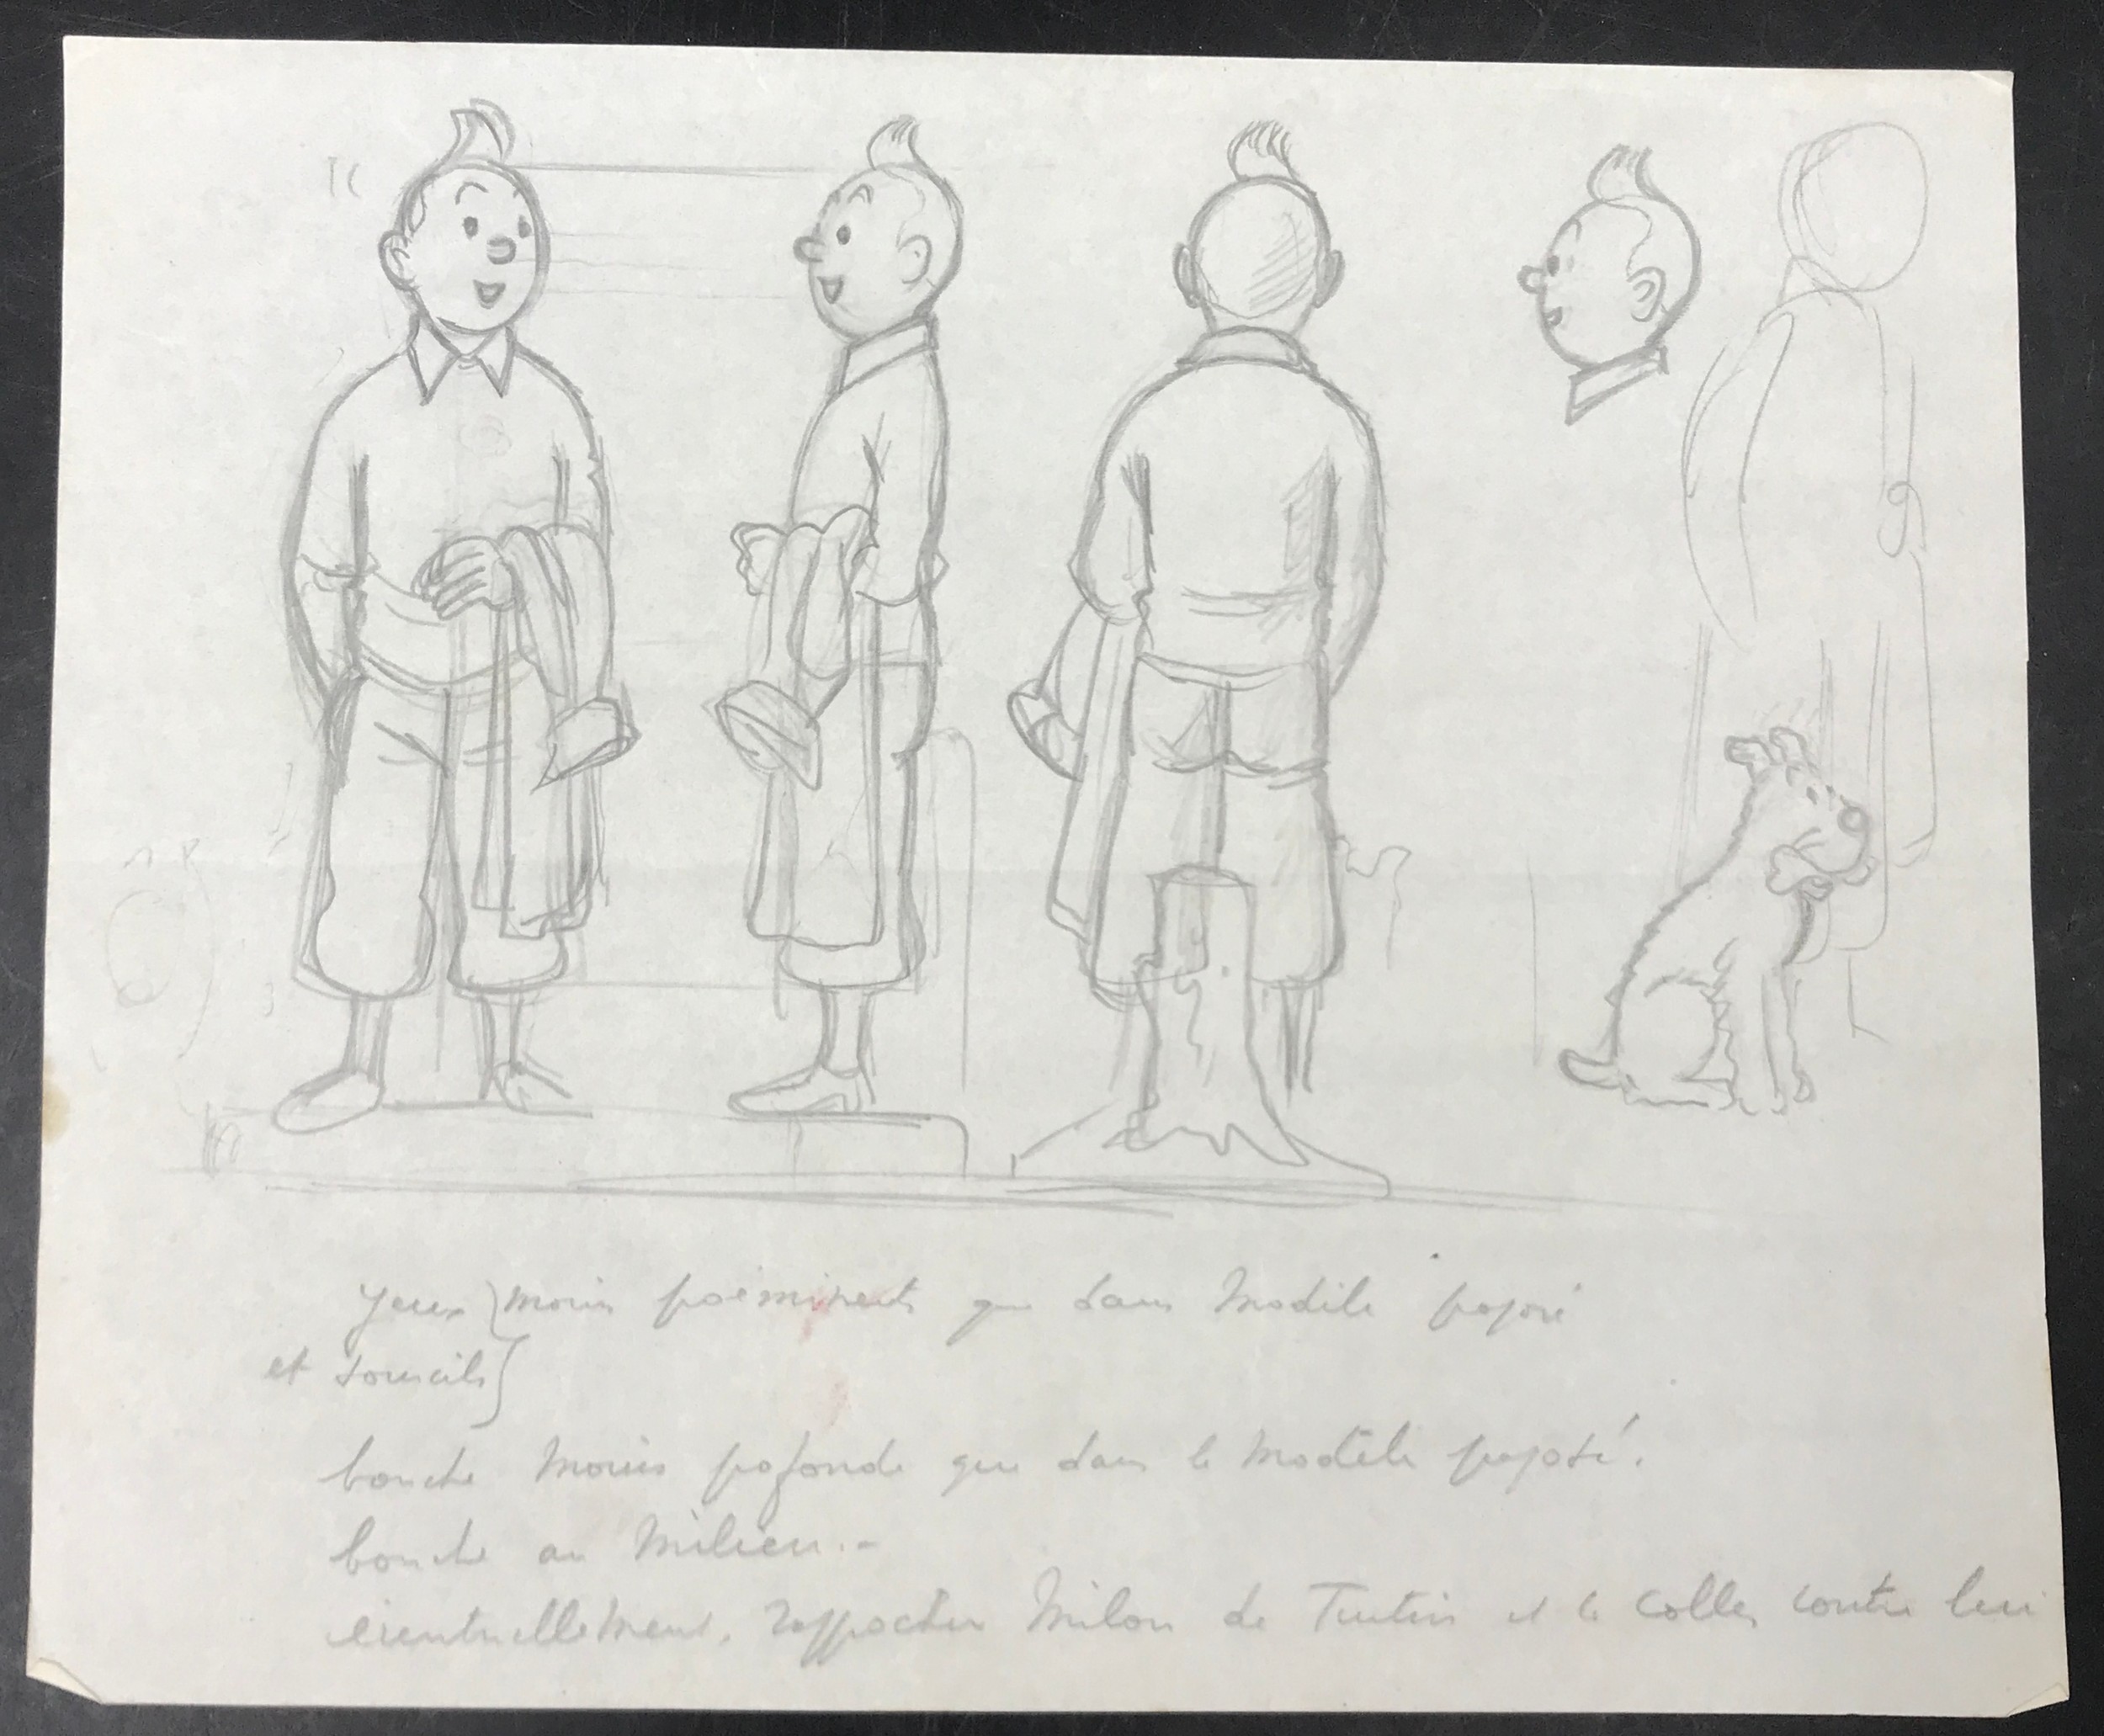 Hergé: Four original sketches by Belgium artist Hergé along with four comic books from the 40s and - Image 4 of 8